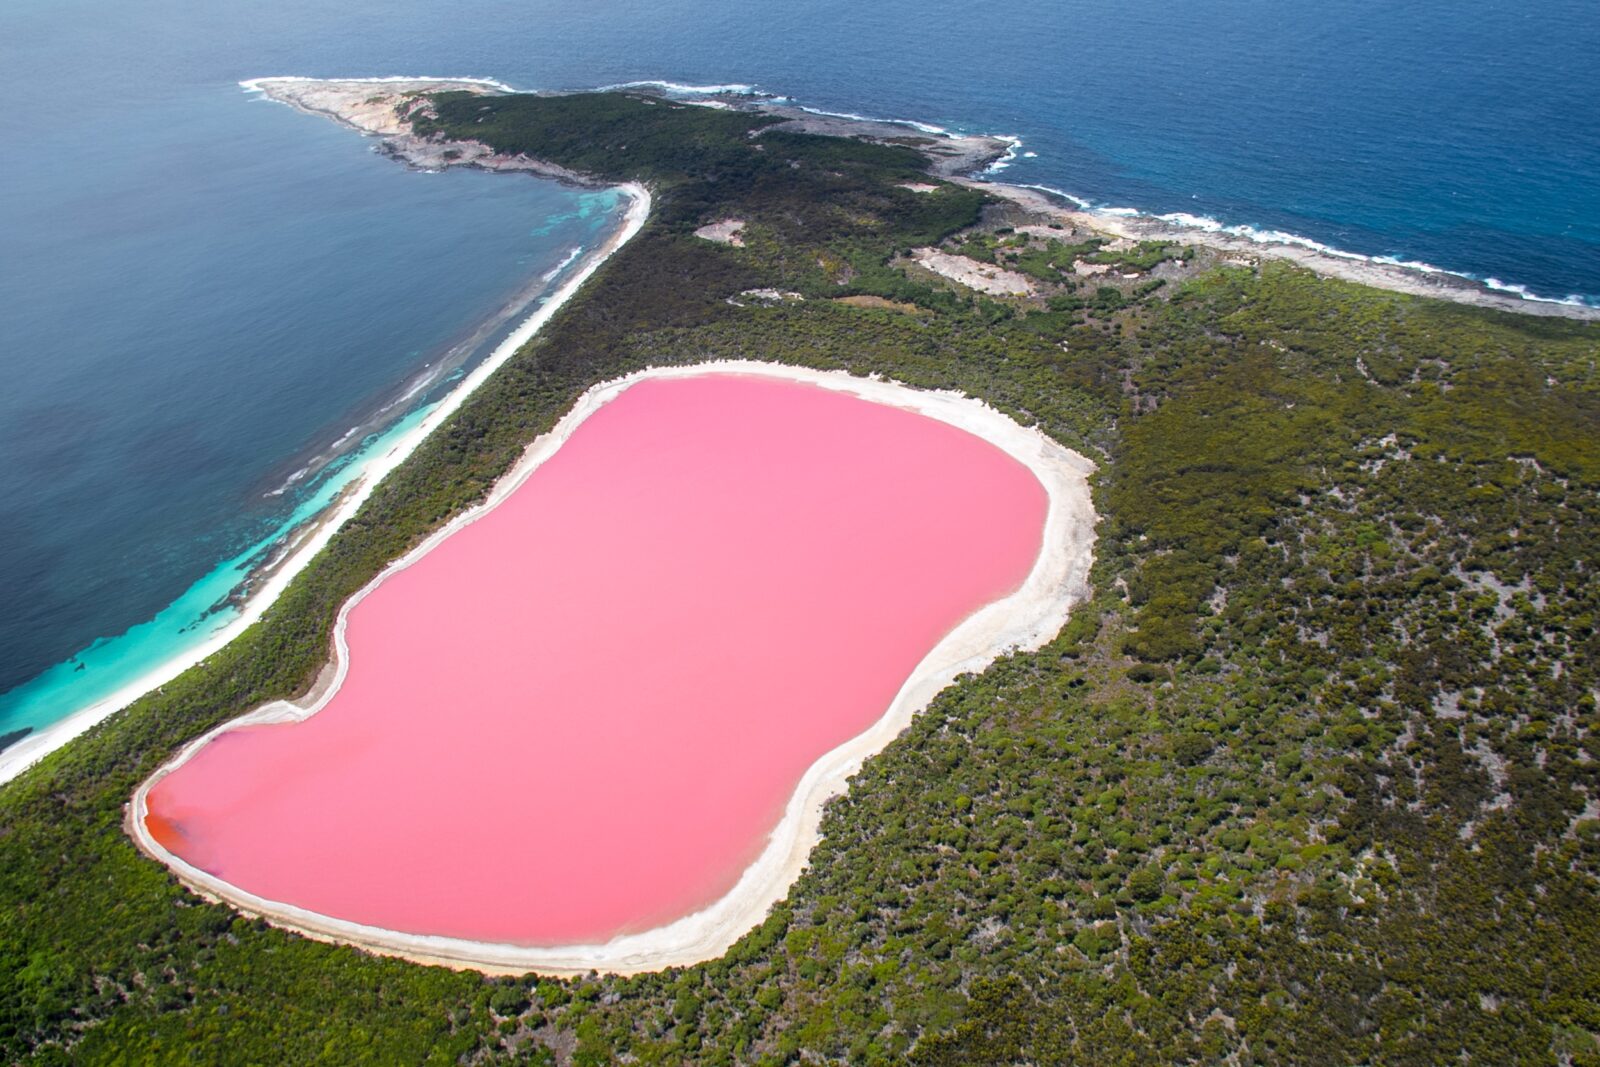 Can You Match These Extraordinary Natural Features to Their Respective Countries? Lake Hillier, Australia